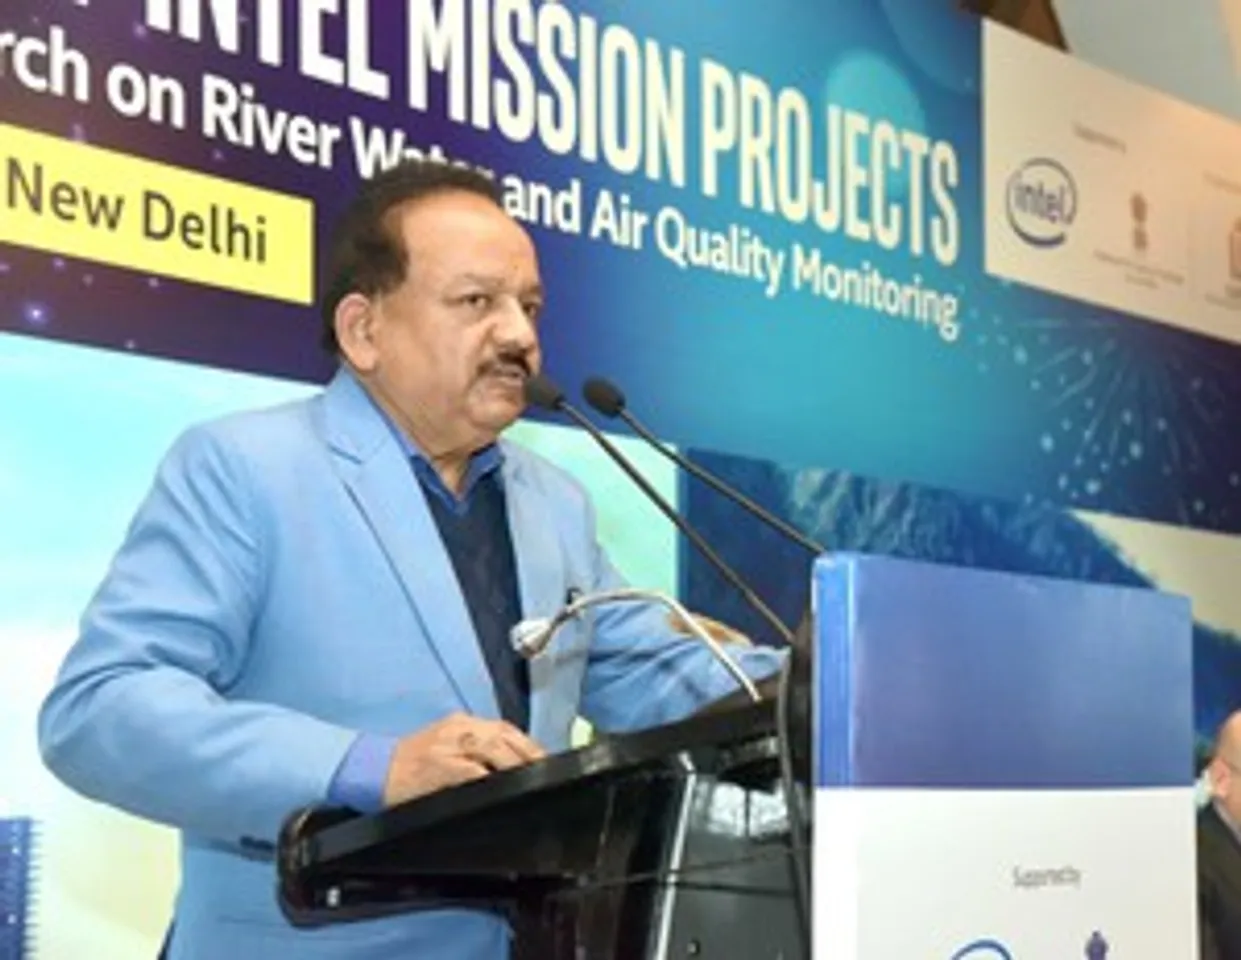 Harsh Vardhan , Science & technology, People-Centric, Research, Technology, Environment,